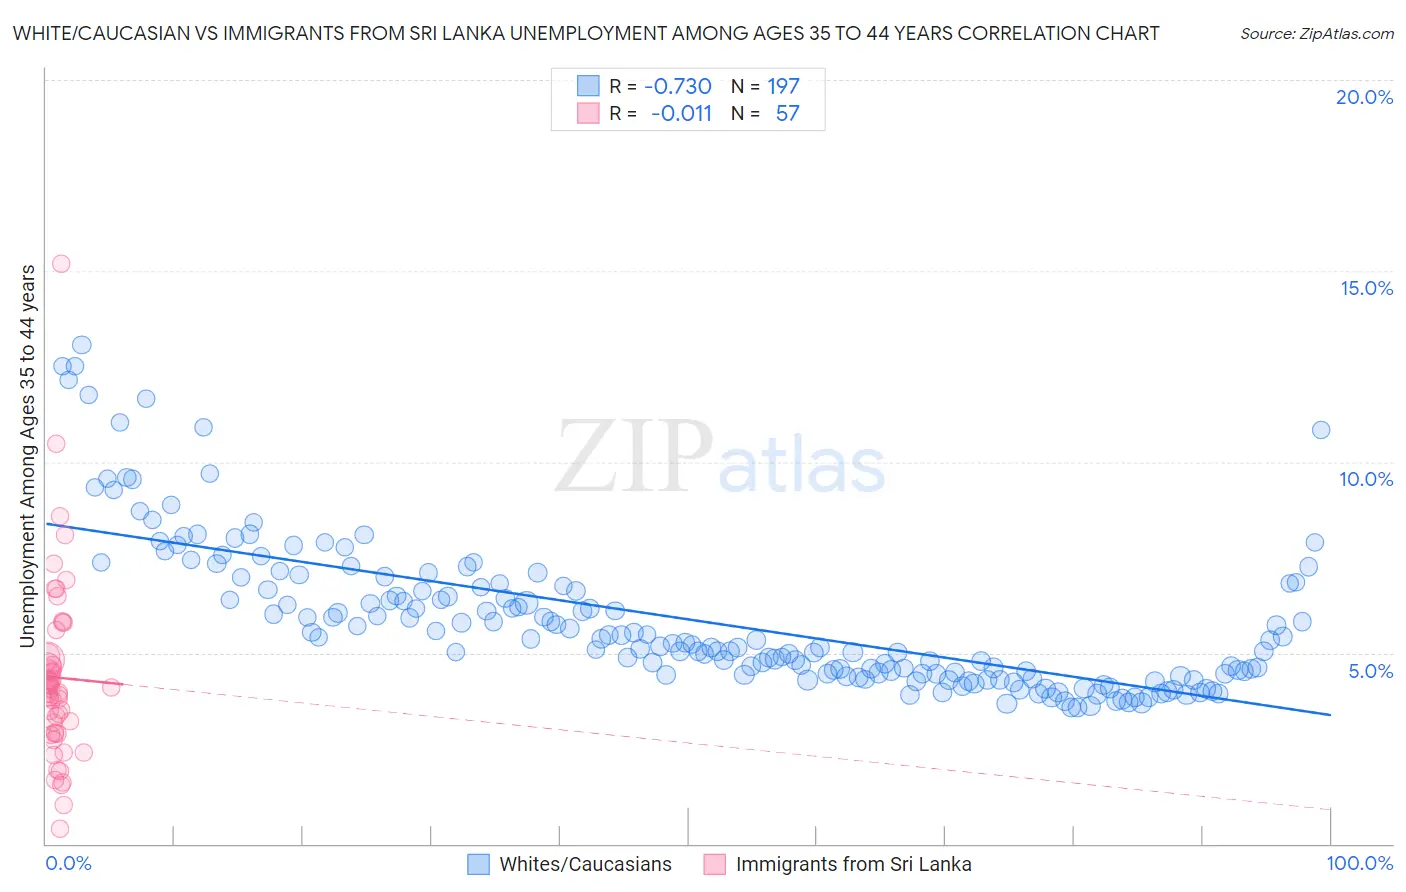 White/Caucasian vs Immigrants from Sri Lanka Unemployment Among Ages 35 to 44 years